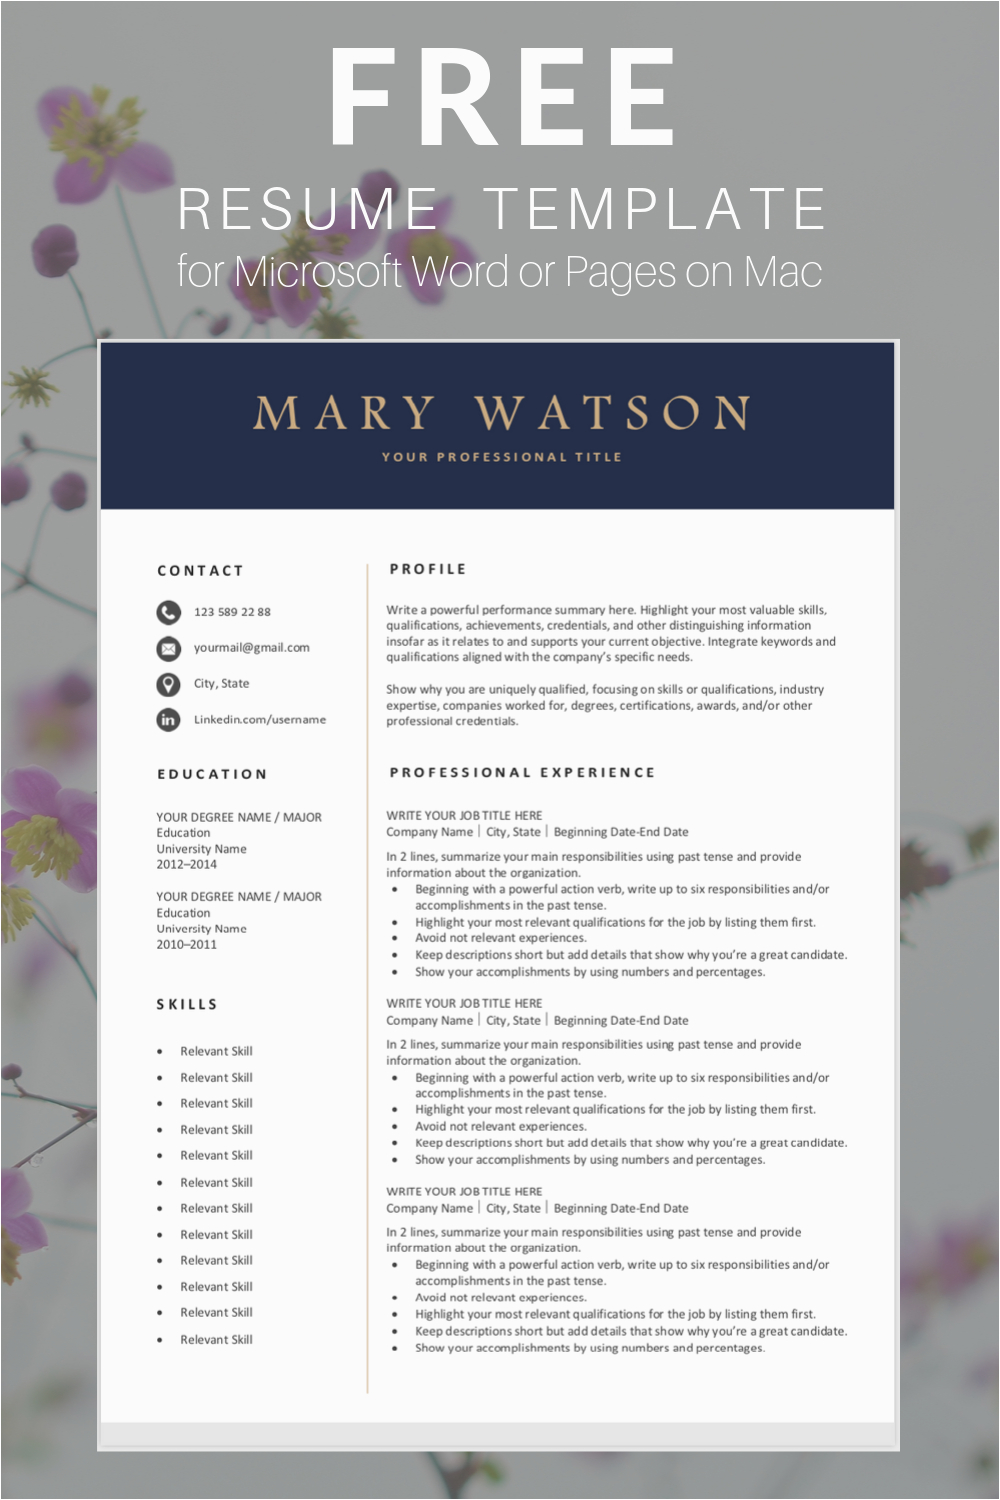 Free Resume Templates that Can Be Downloaded Professional Resume Template Download for Free with